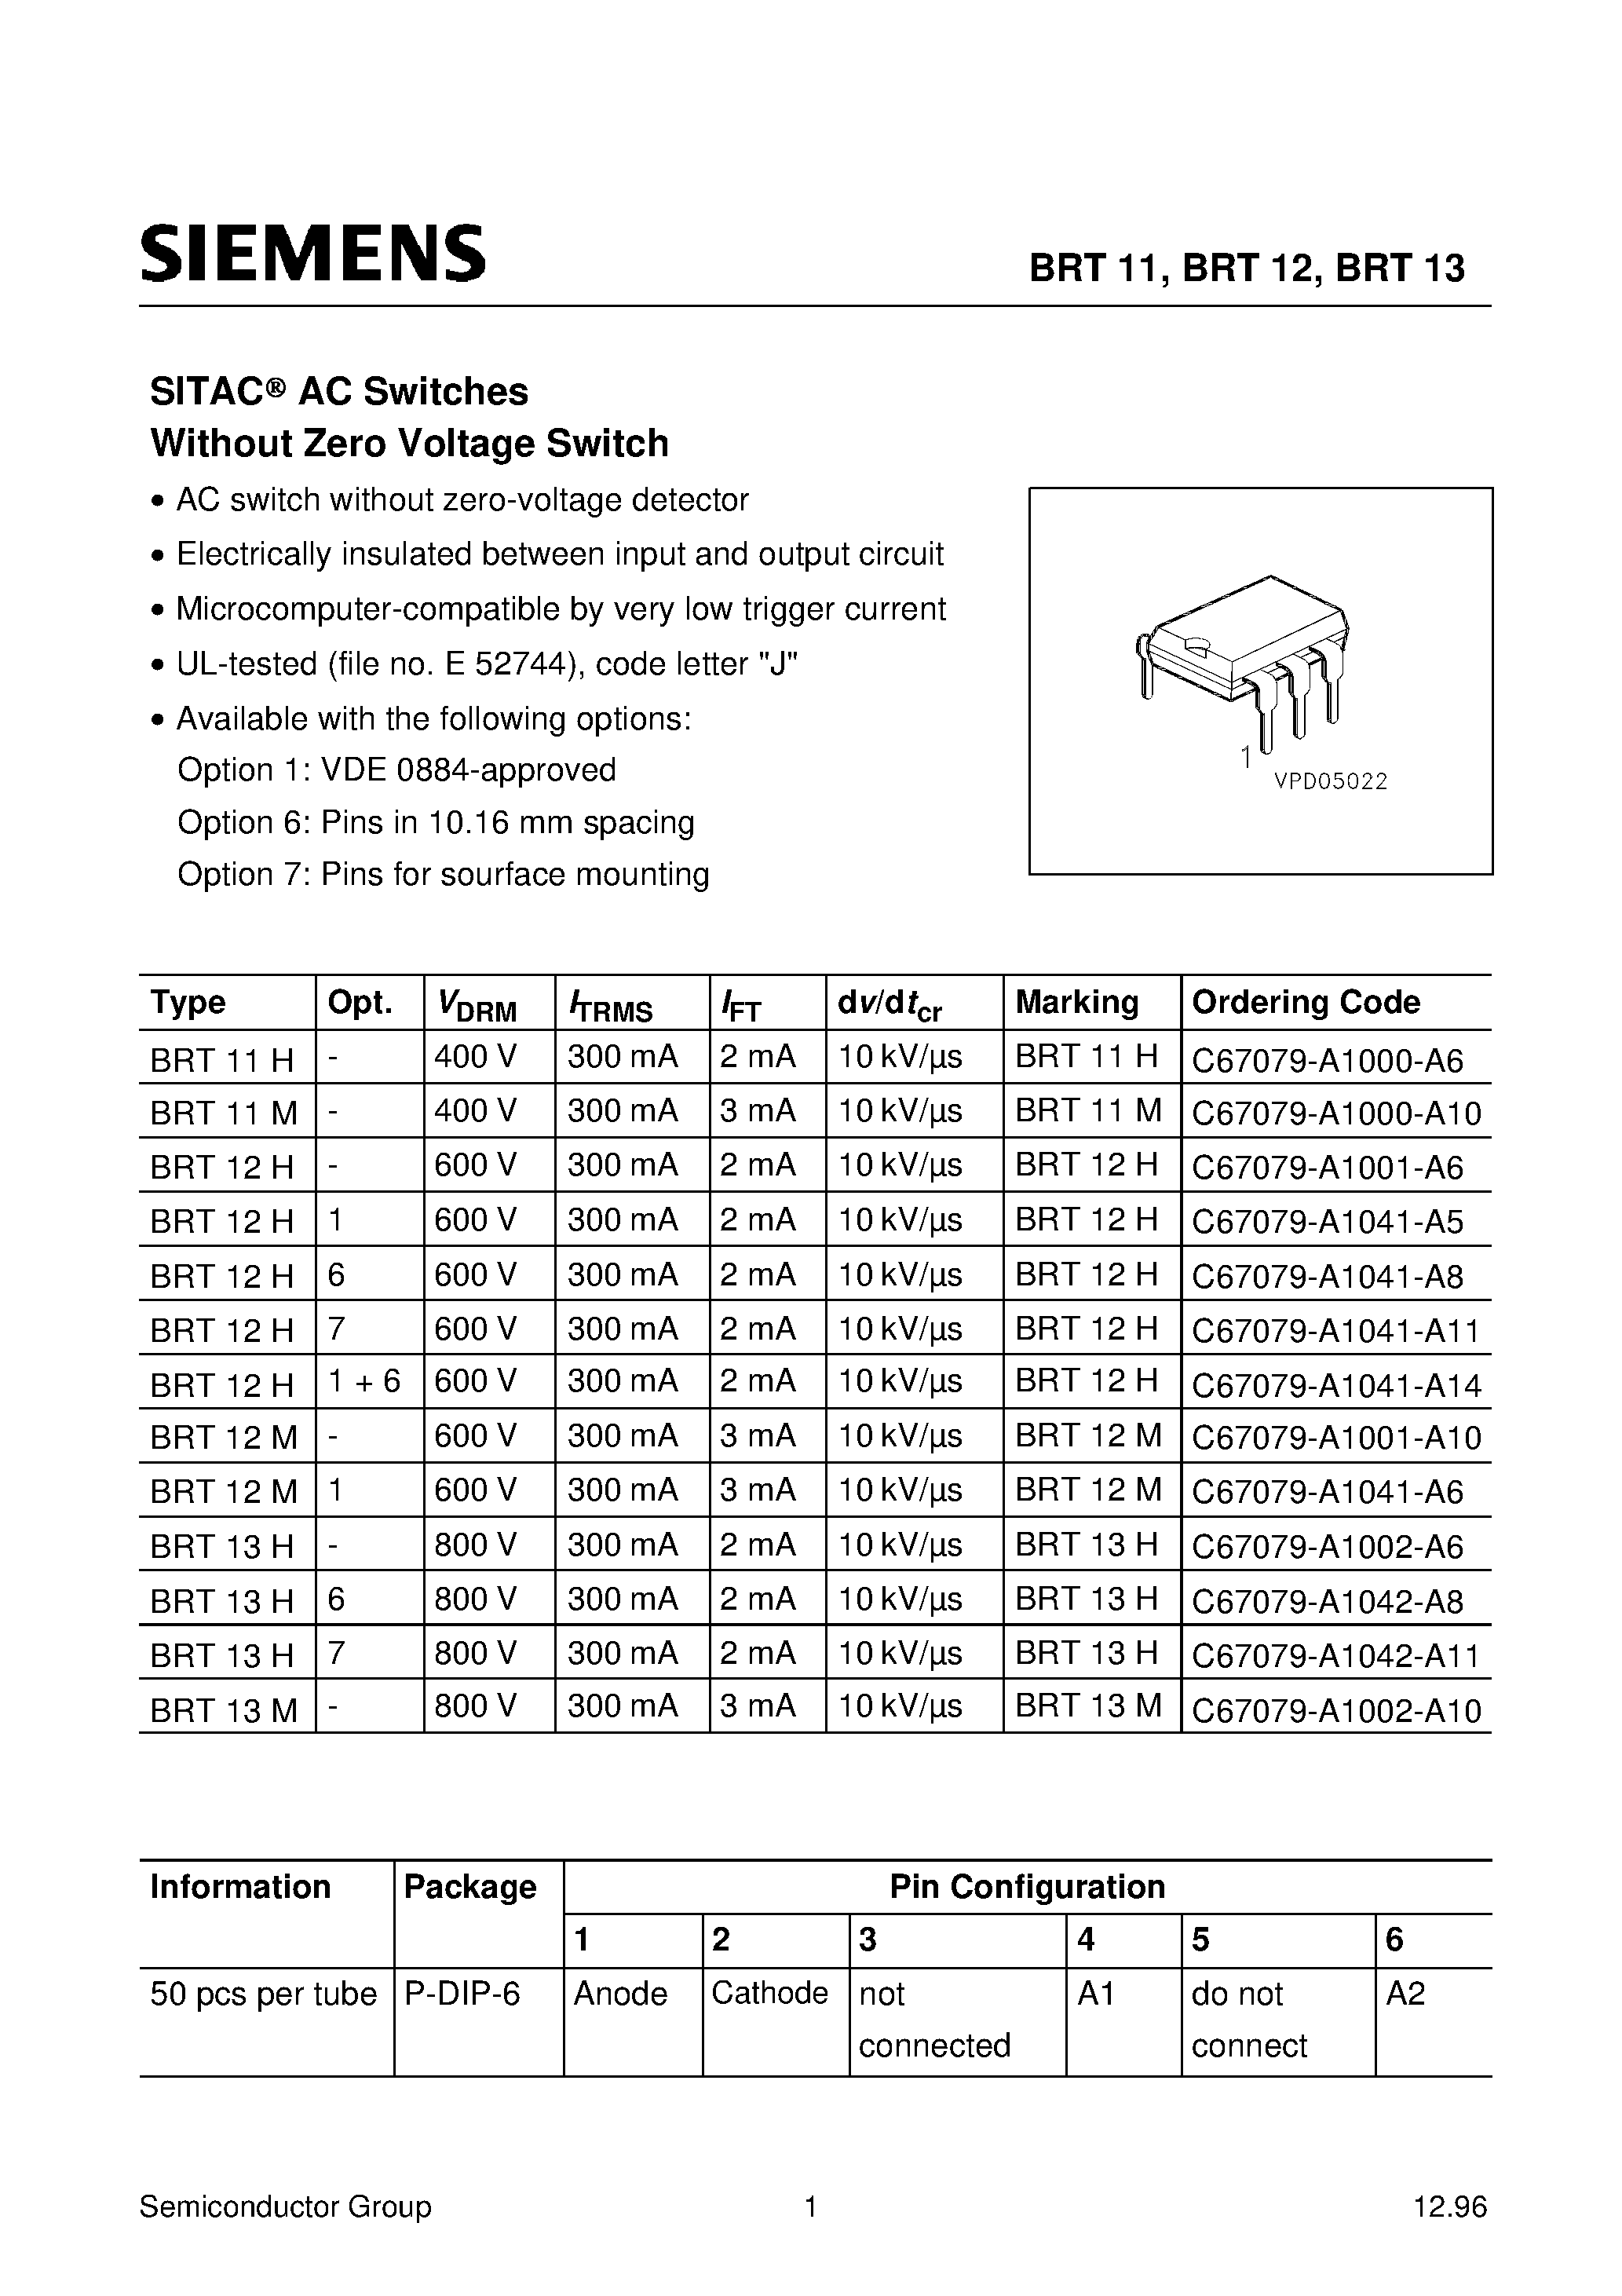 Datasheet BRT11H - SITACO AC Switches Without Zero Voltage Switch page 1